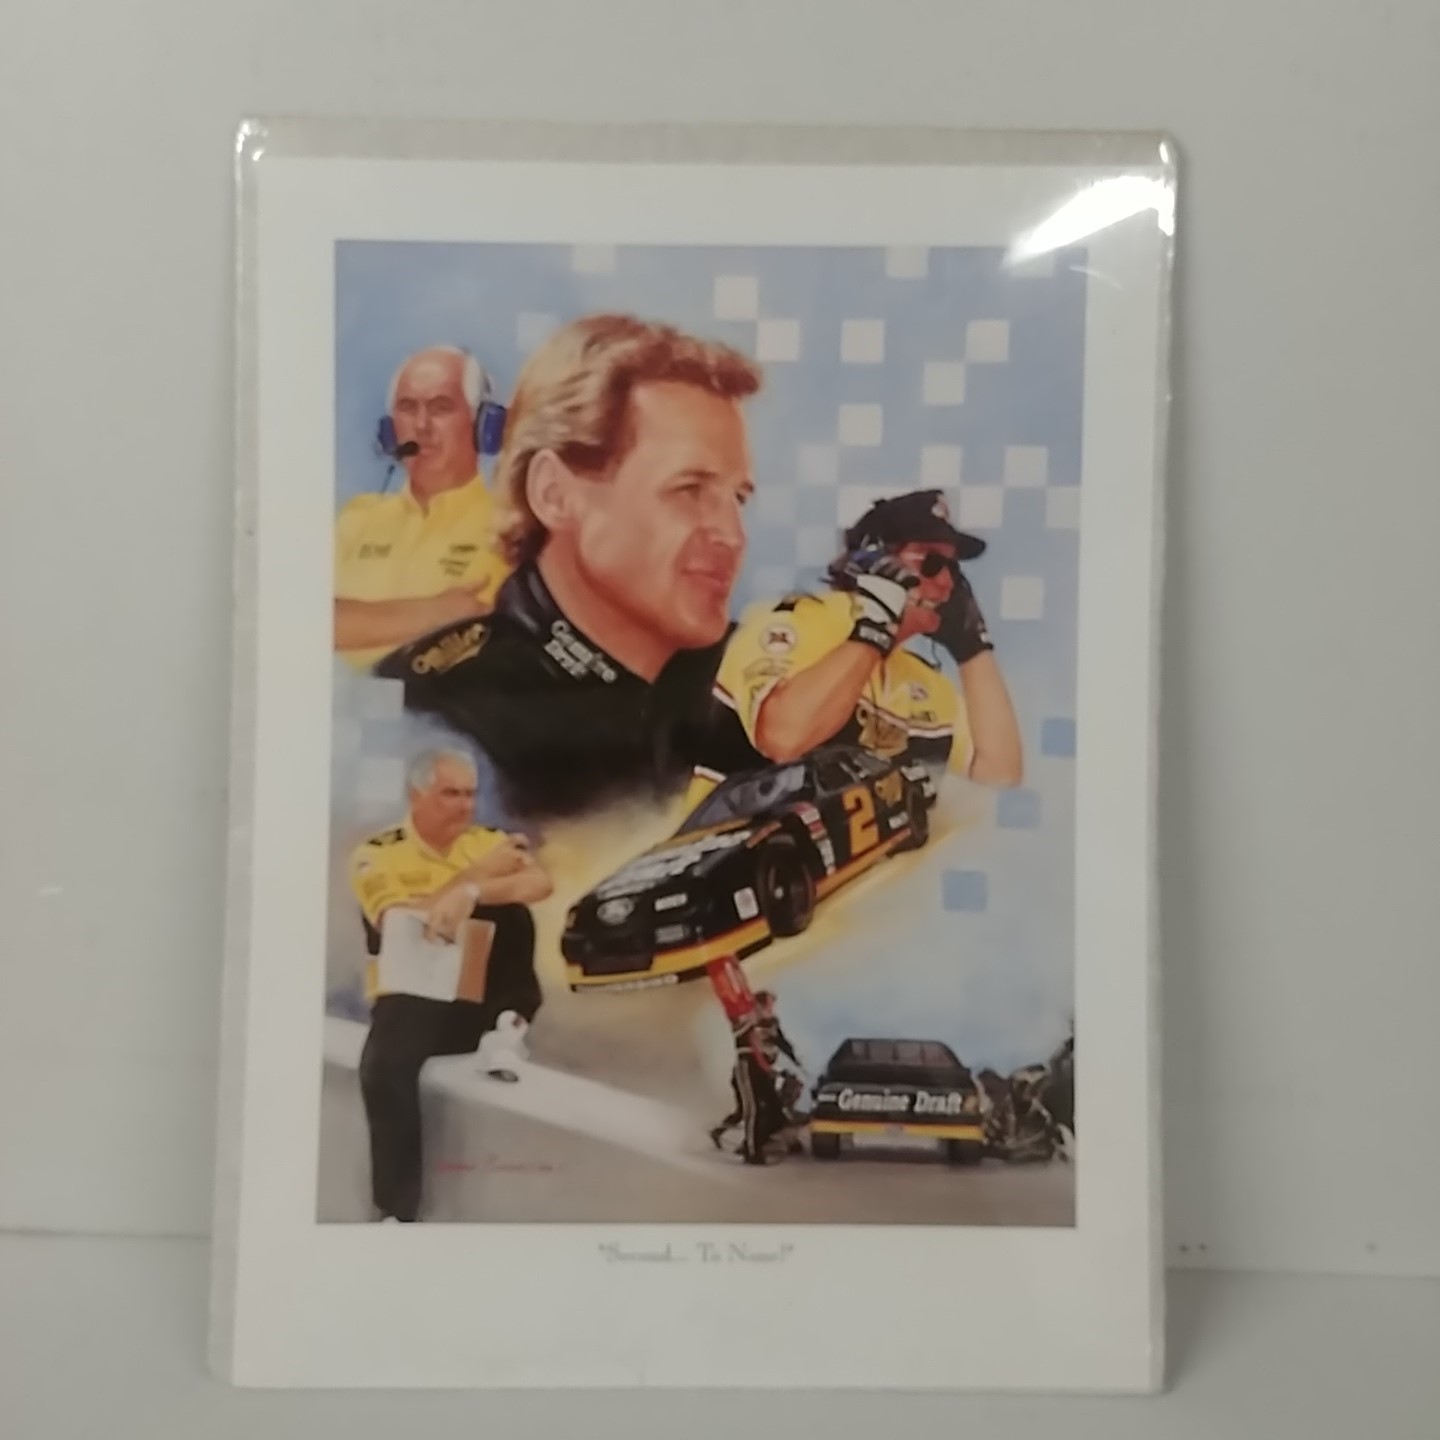 1994 Rusty Wallace Miller Genuine Draft "Second To None" print by Jeanne Barnes